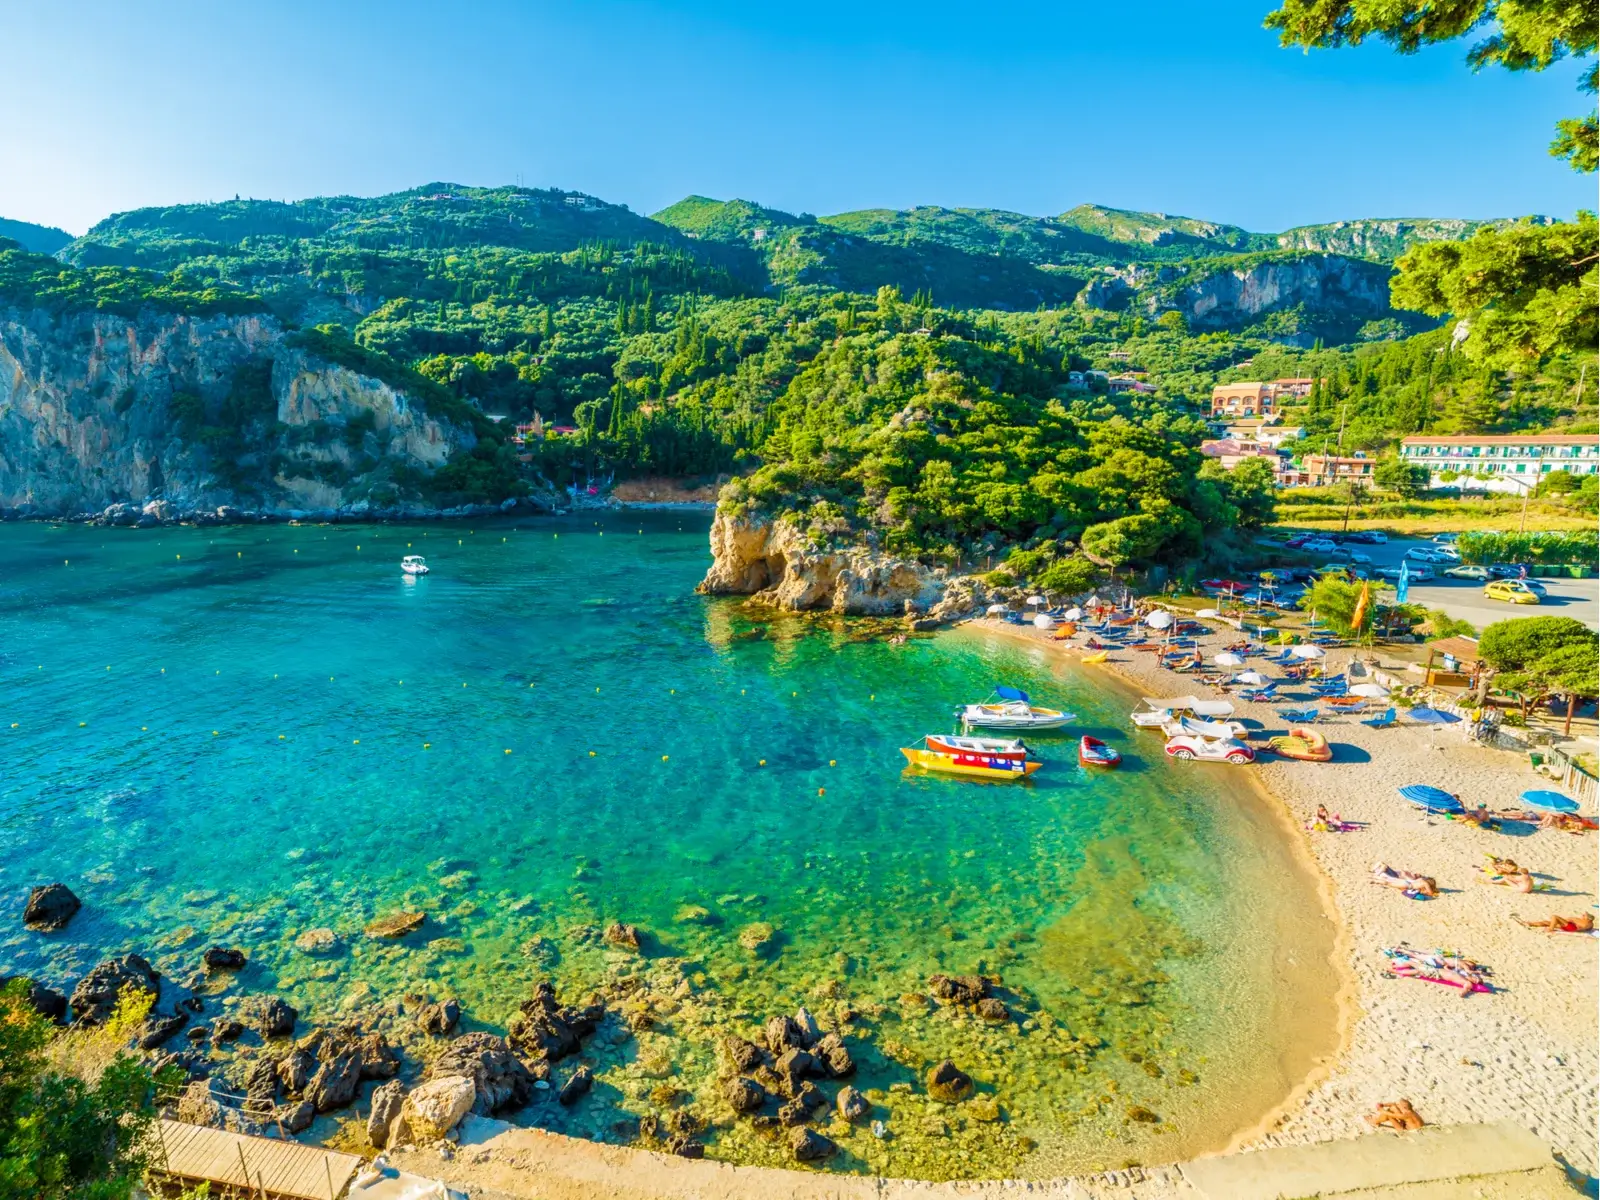 Paleokastritsa, Corfu, a top pick for the best beach in Greece, with gorgeous teal water and lush greenery around the coast